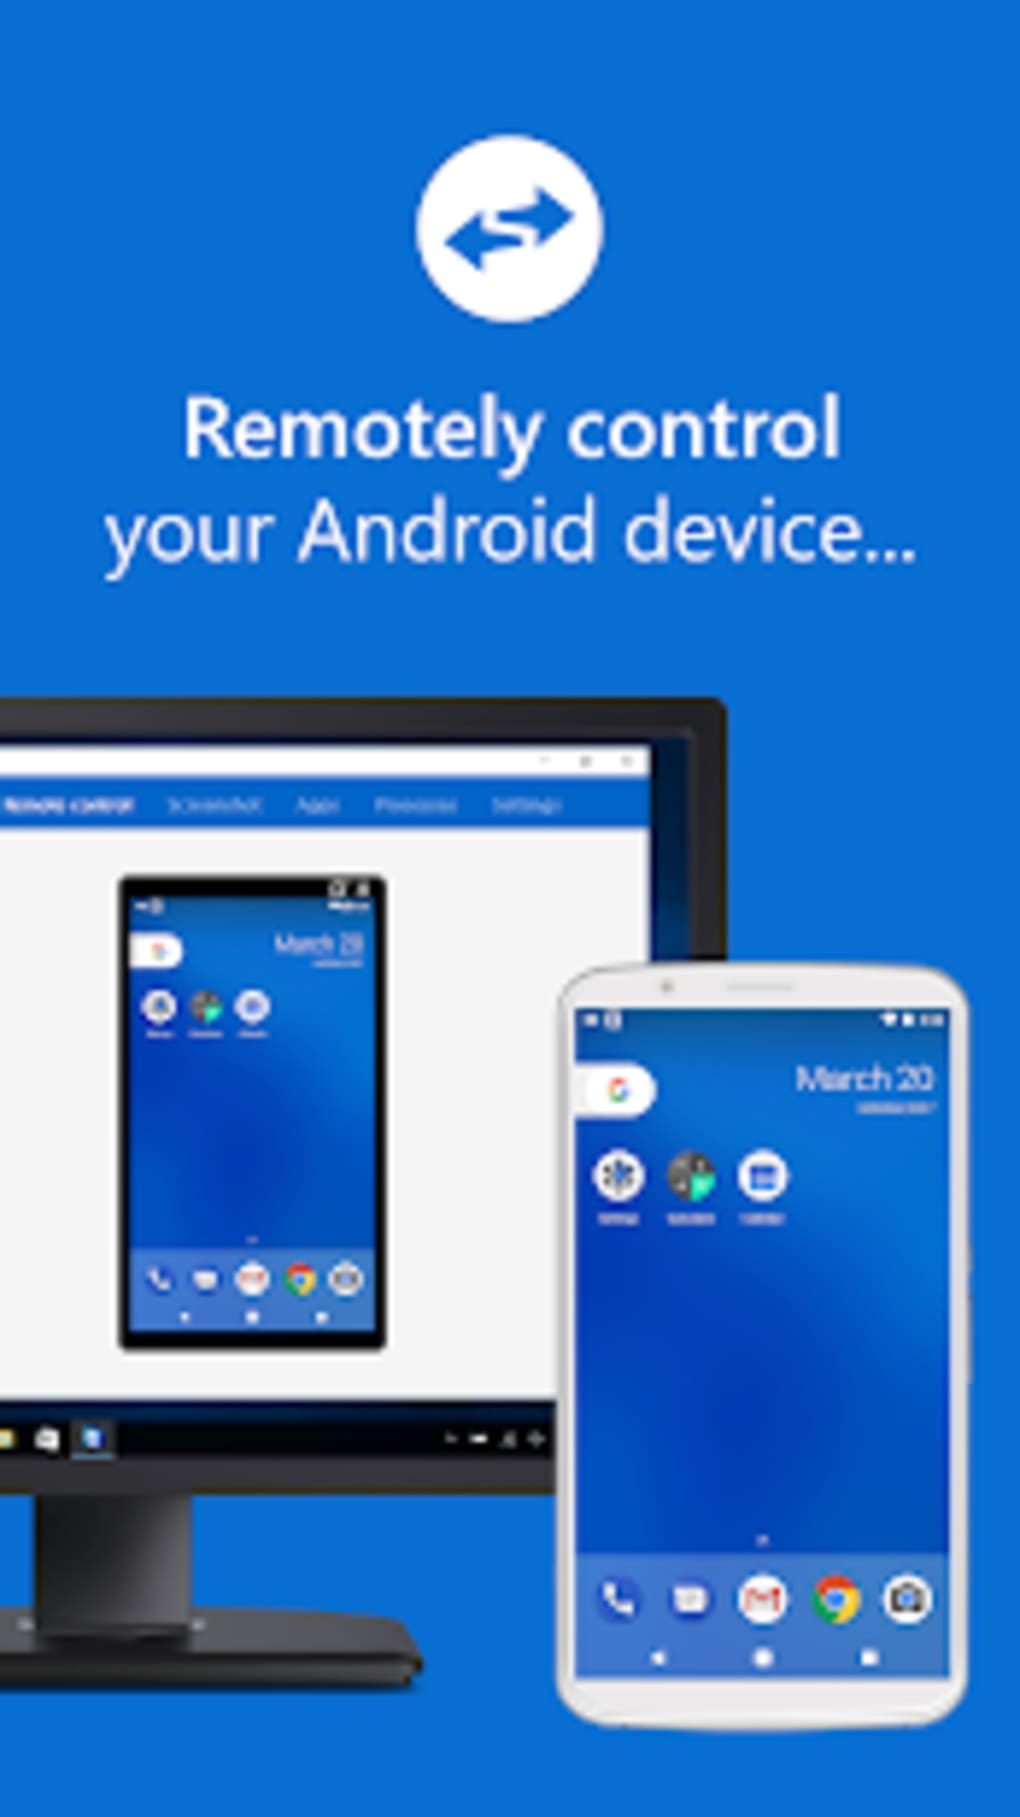 teamviewer android 7 apk download